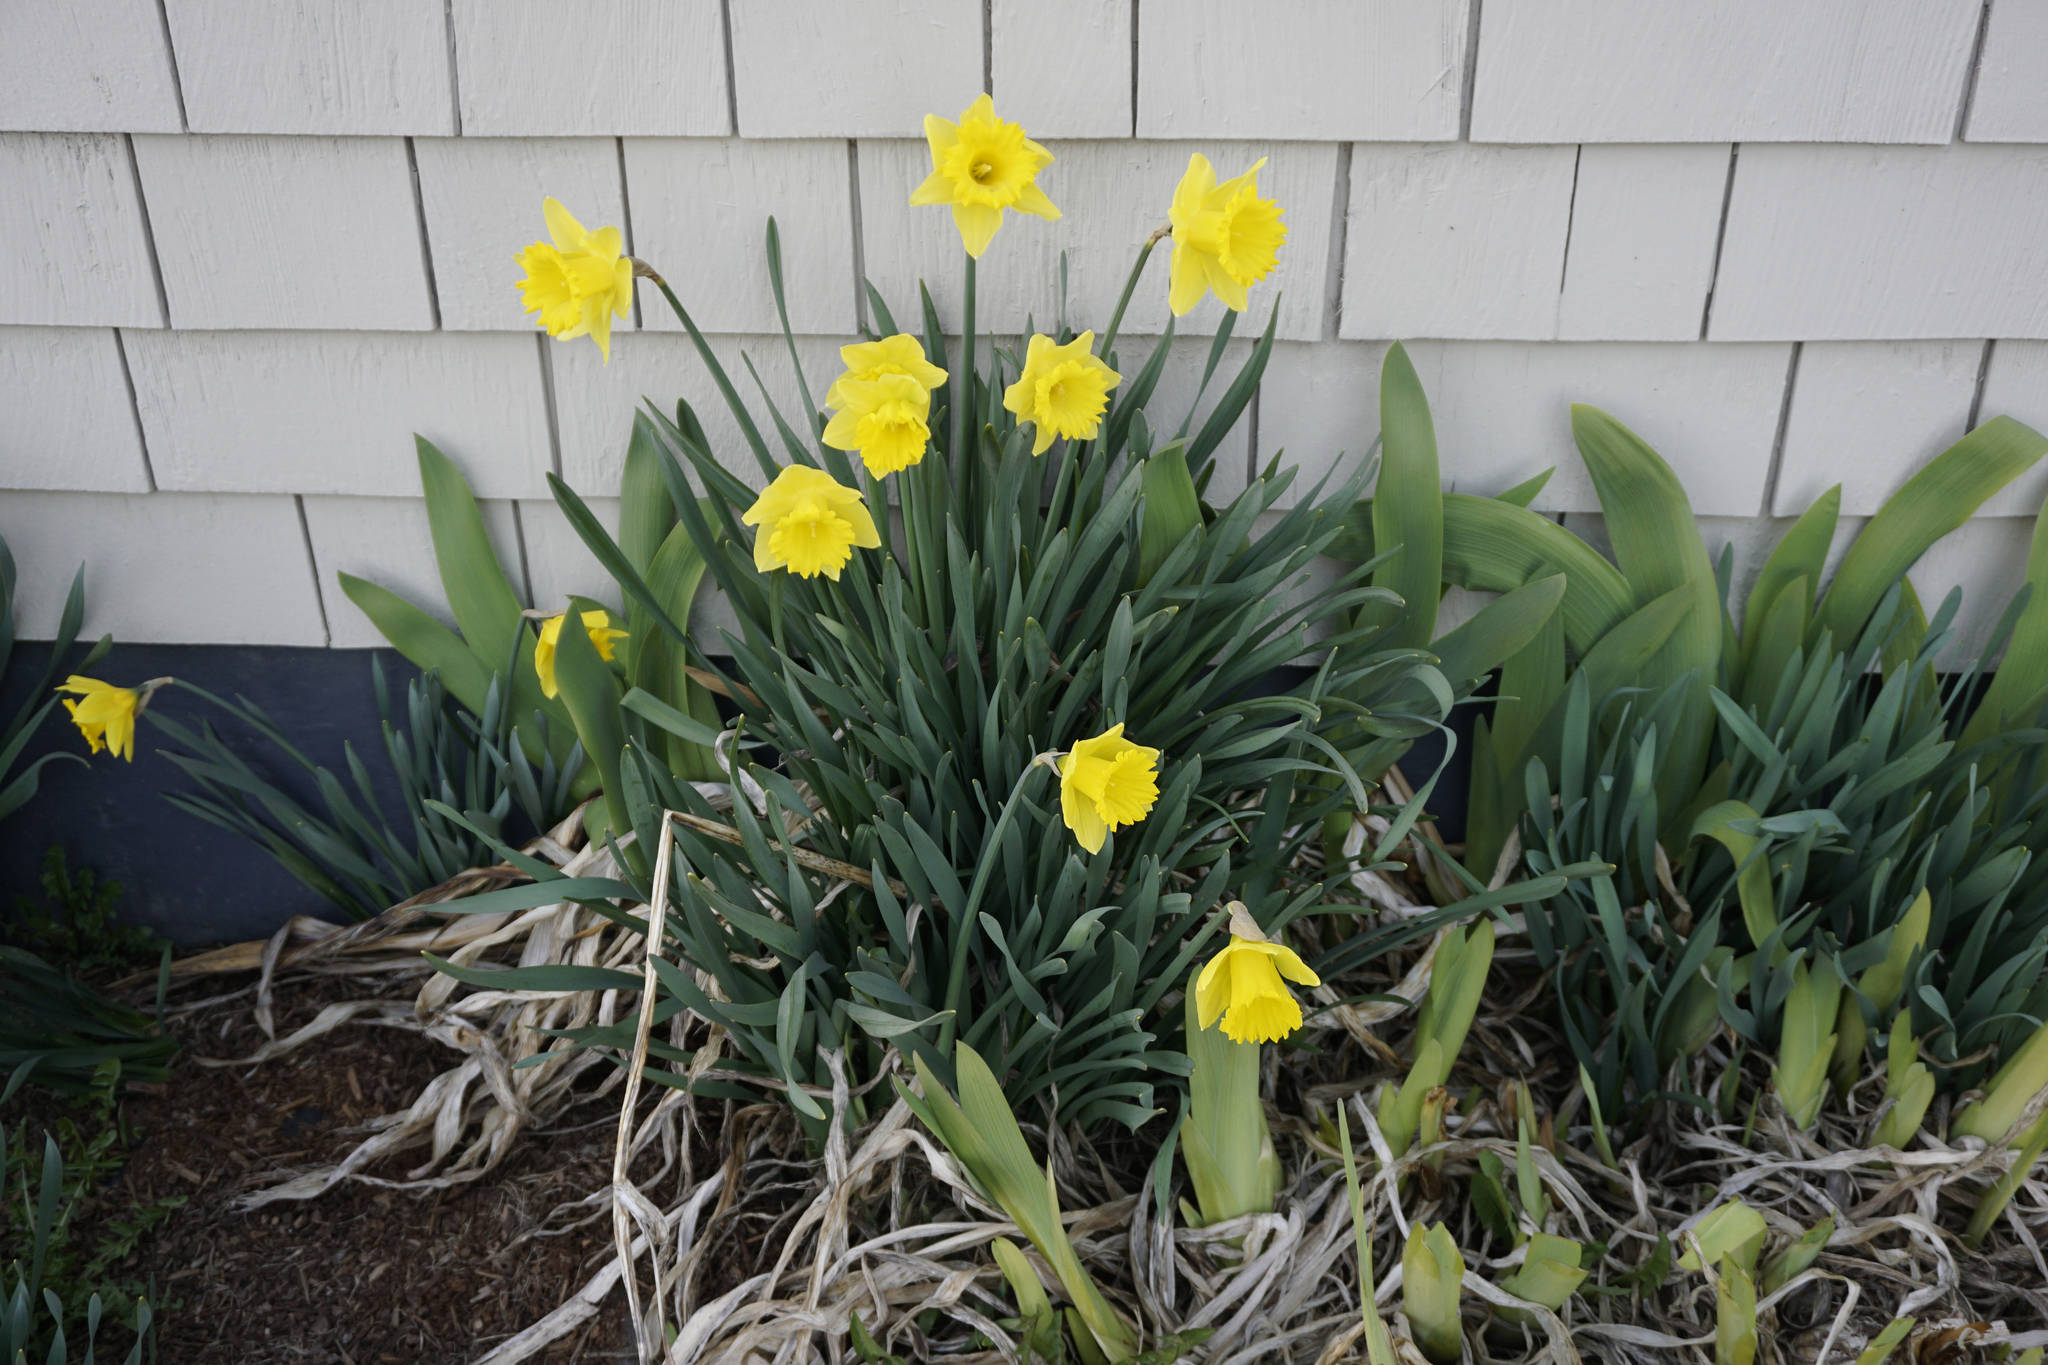 Daffodils bloom on April 2, 2019, on the south side of the Homer Electric Association building in Homer, Alaska. According to the Alaska Climate Research Center of the University of Alaska Fairbanks, new monthly high temperatures records were set for March in 10 of 19 weather stations, including Homer. (Photo by Michael Armstrong/Homer News)